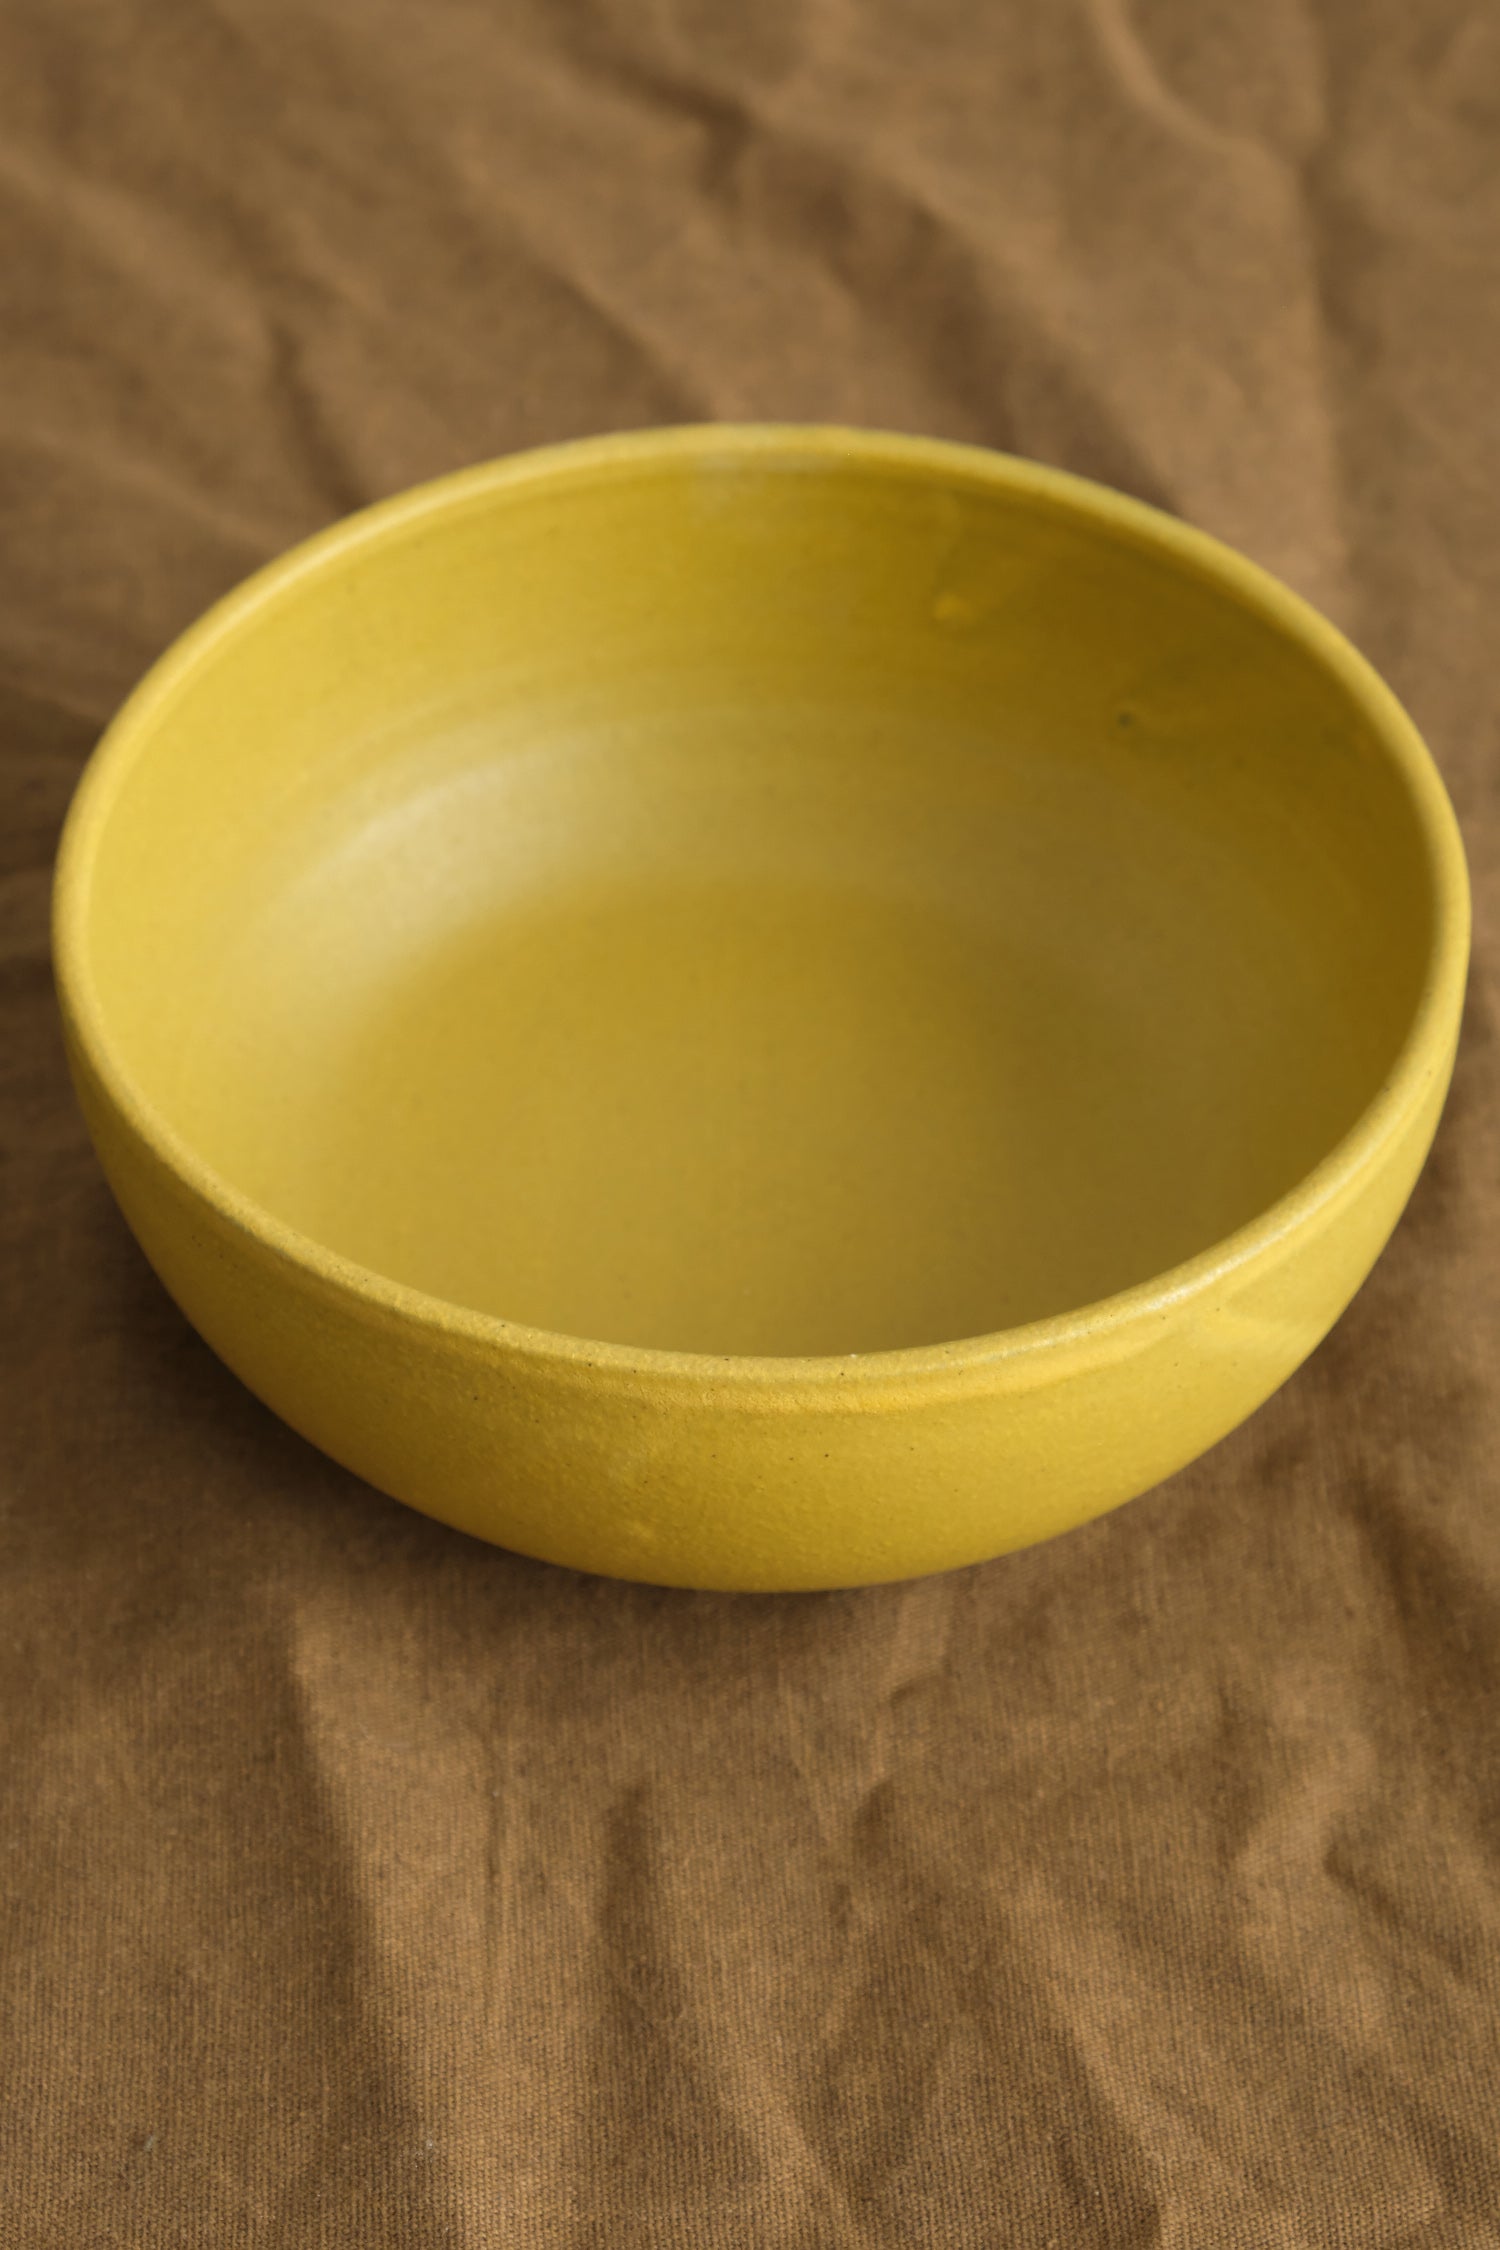 Inside of Cereal Bowl in Turmeric